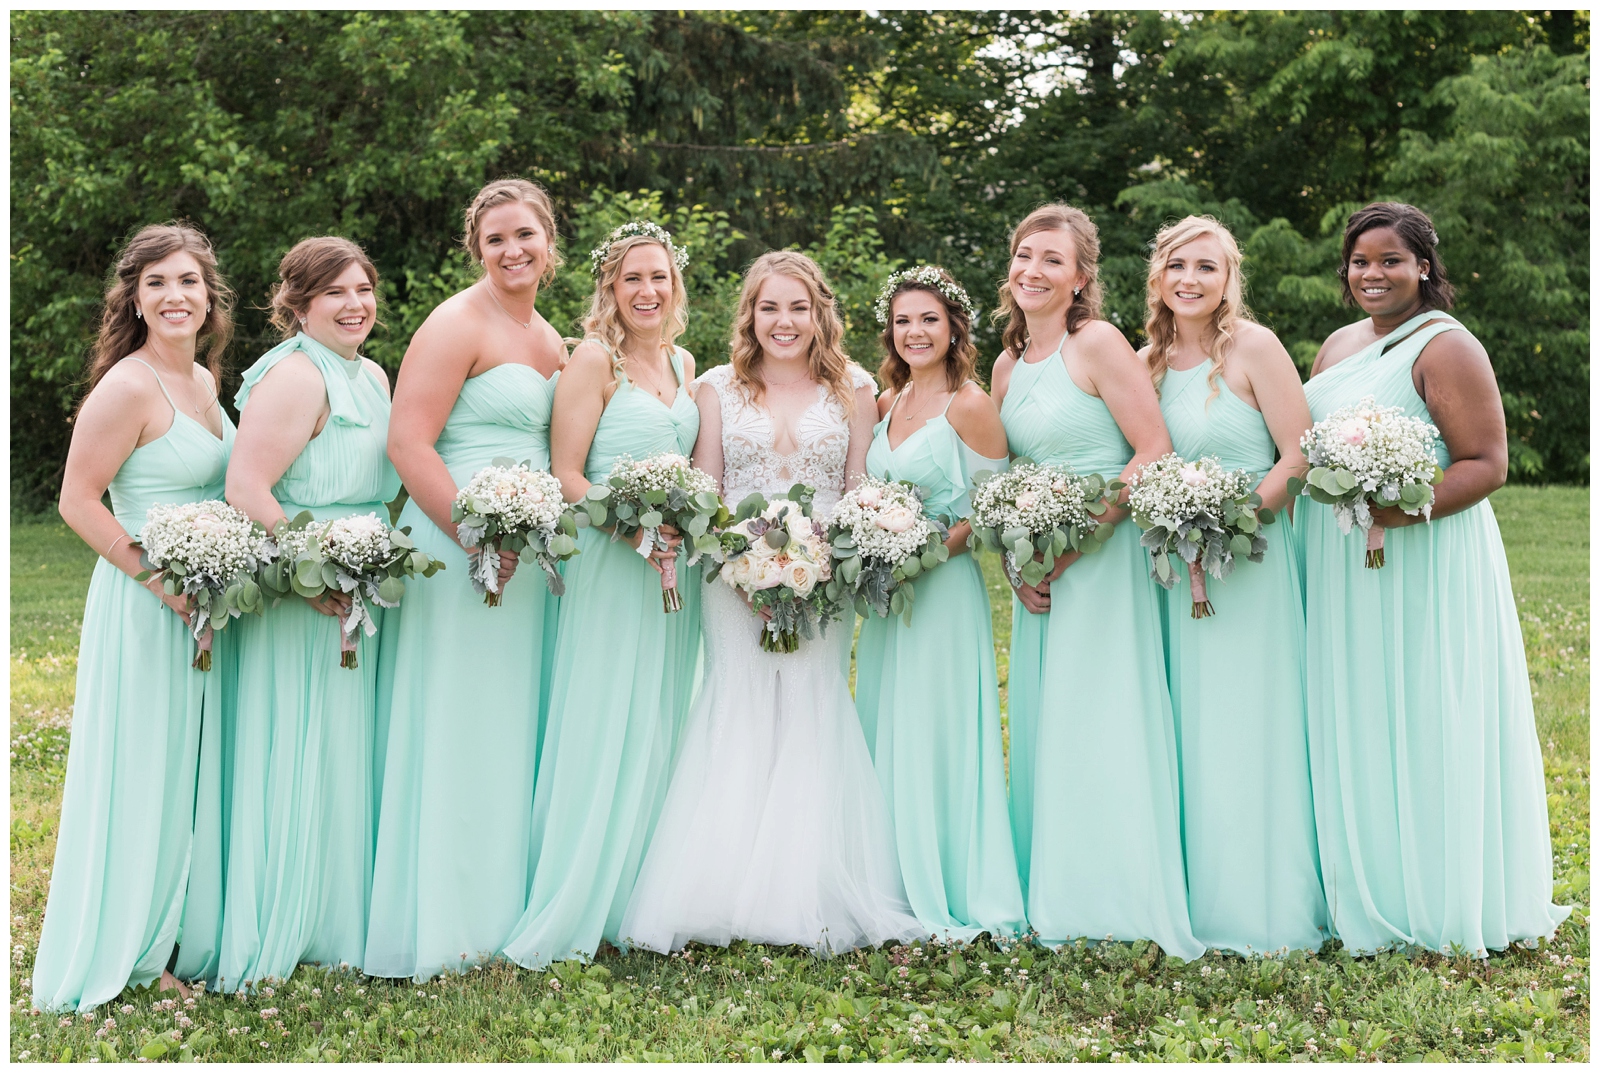 bridesmaids wearing mint green dresses smile with bride while holding white bouquets